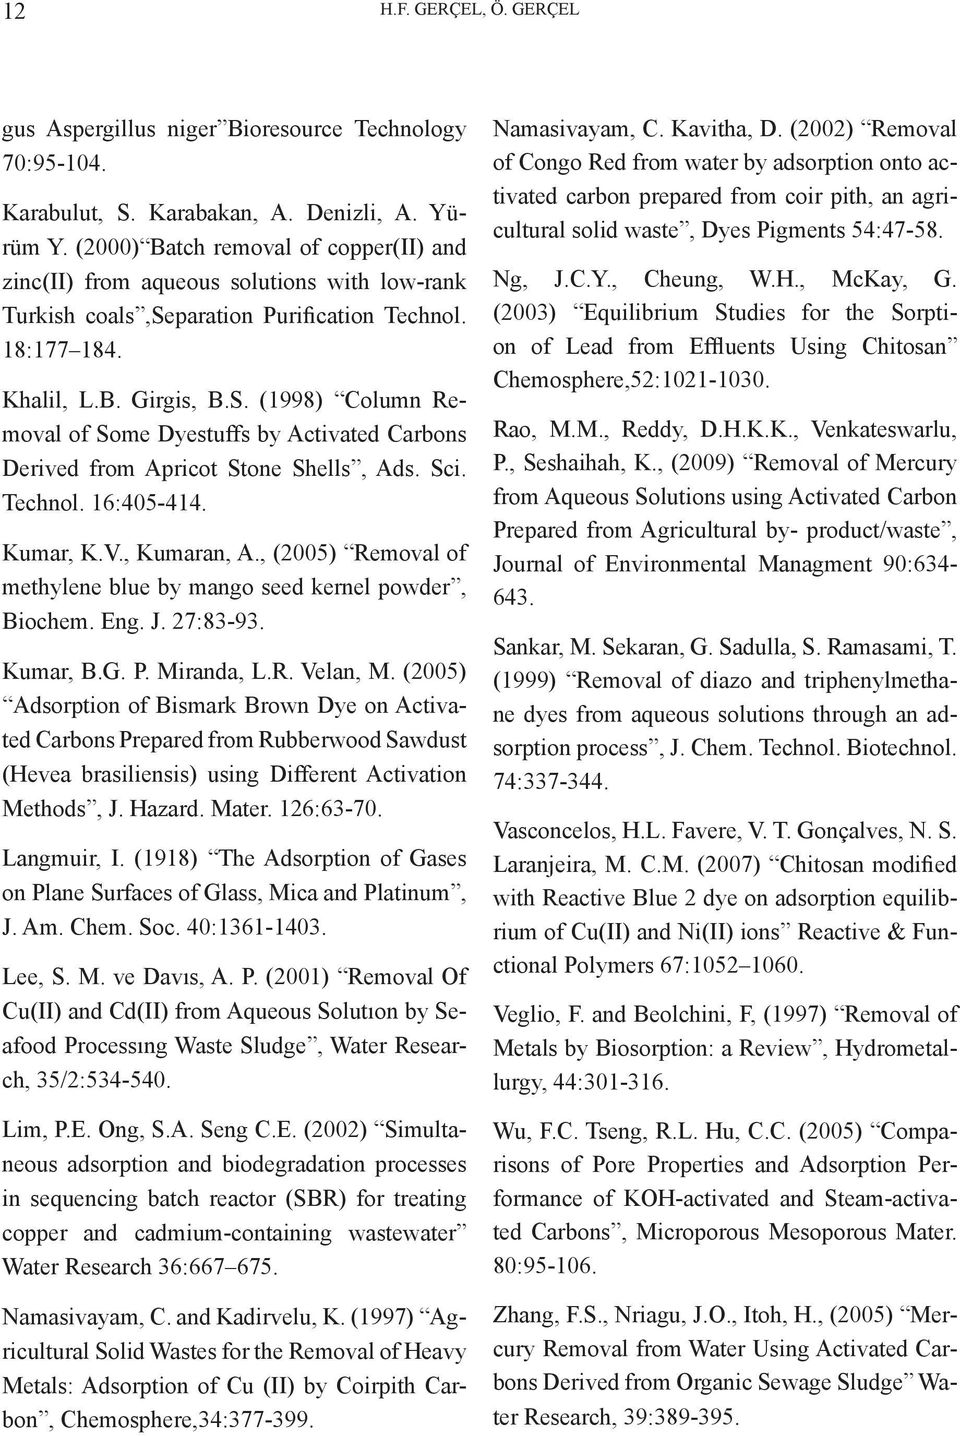 (1998) Column Removal of Some Dyestuffs by Activated Carbons Derived from Apricot Stone Shells, Ads. Sci. Technol. 16:405-414. Kumar, K.V., Kumaran, A.